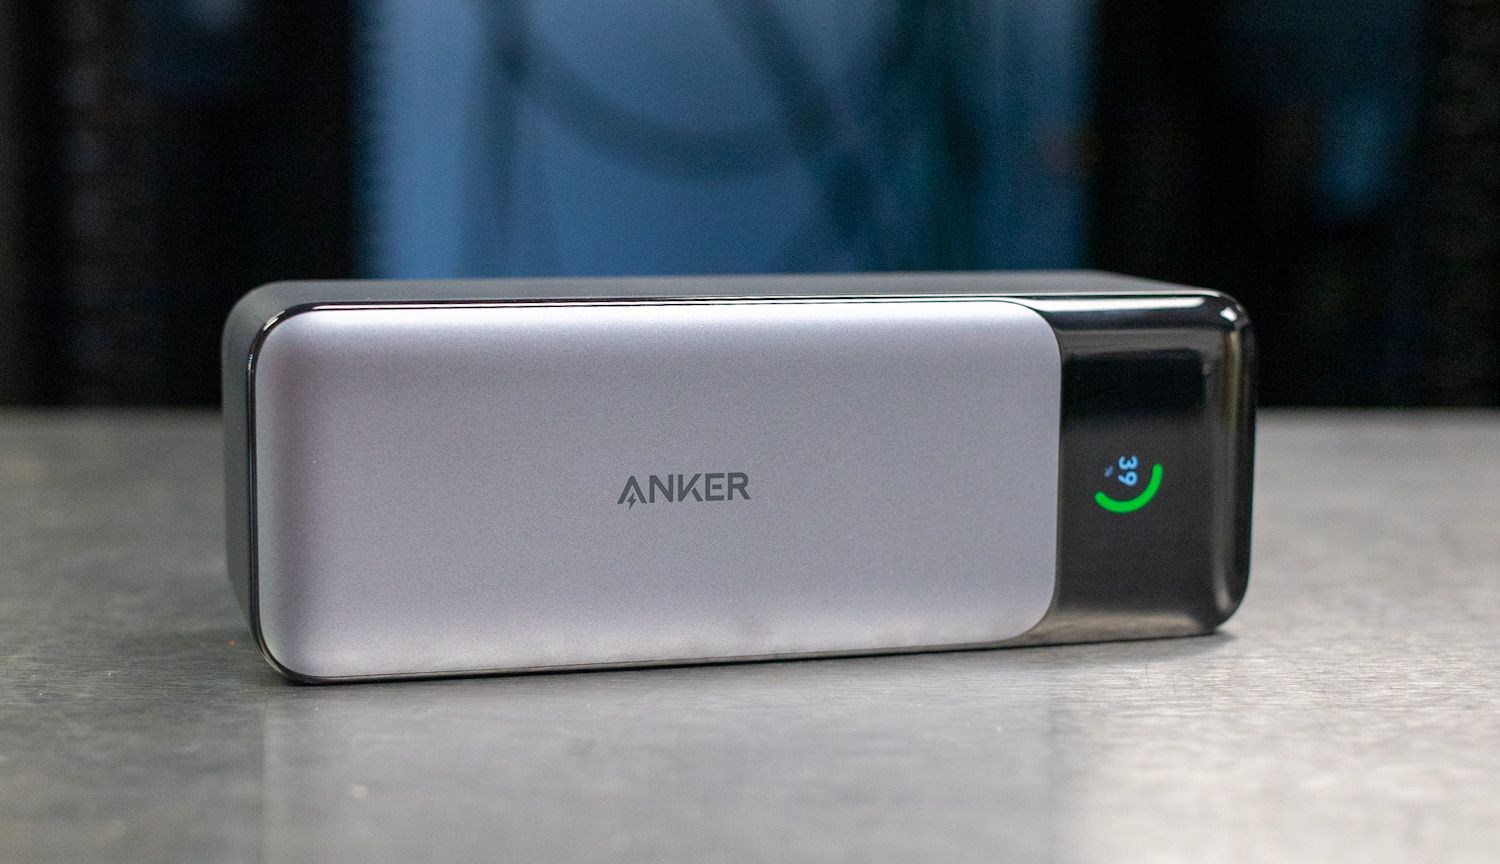 https://www.storagereview.com/wp-content/uploads/2023/06/StorageReview-Anker-Power-Bank-737-4.jpg